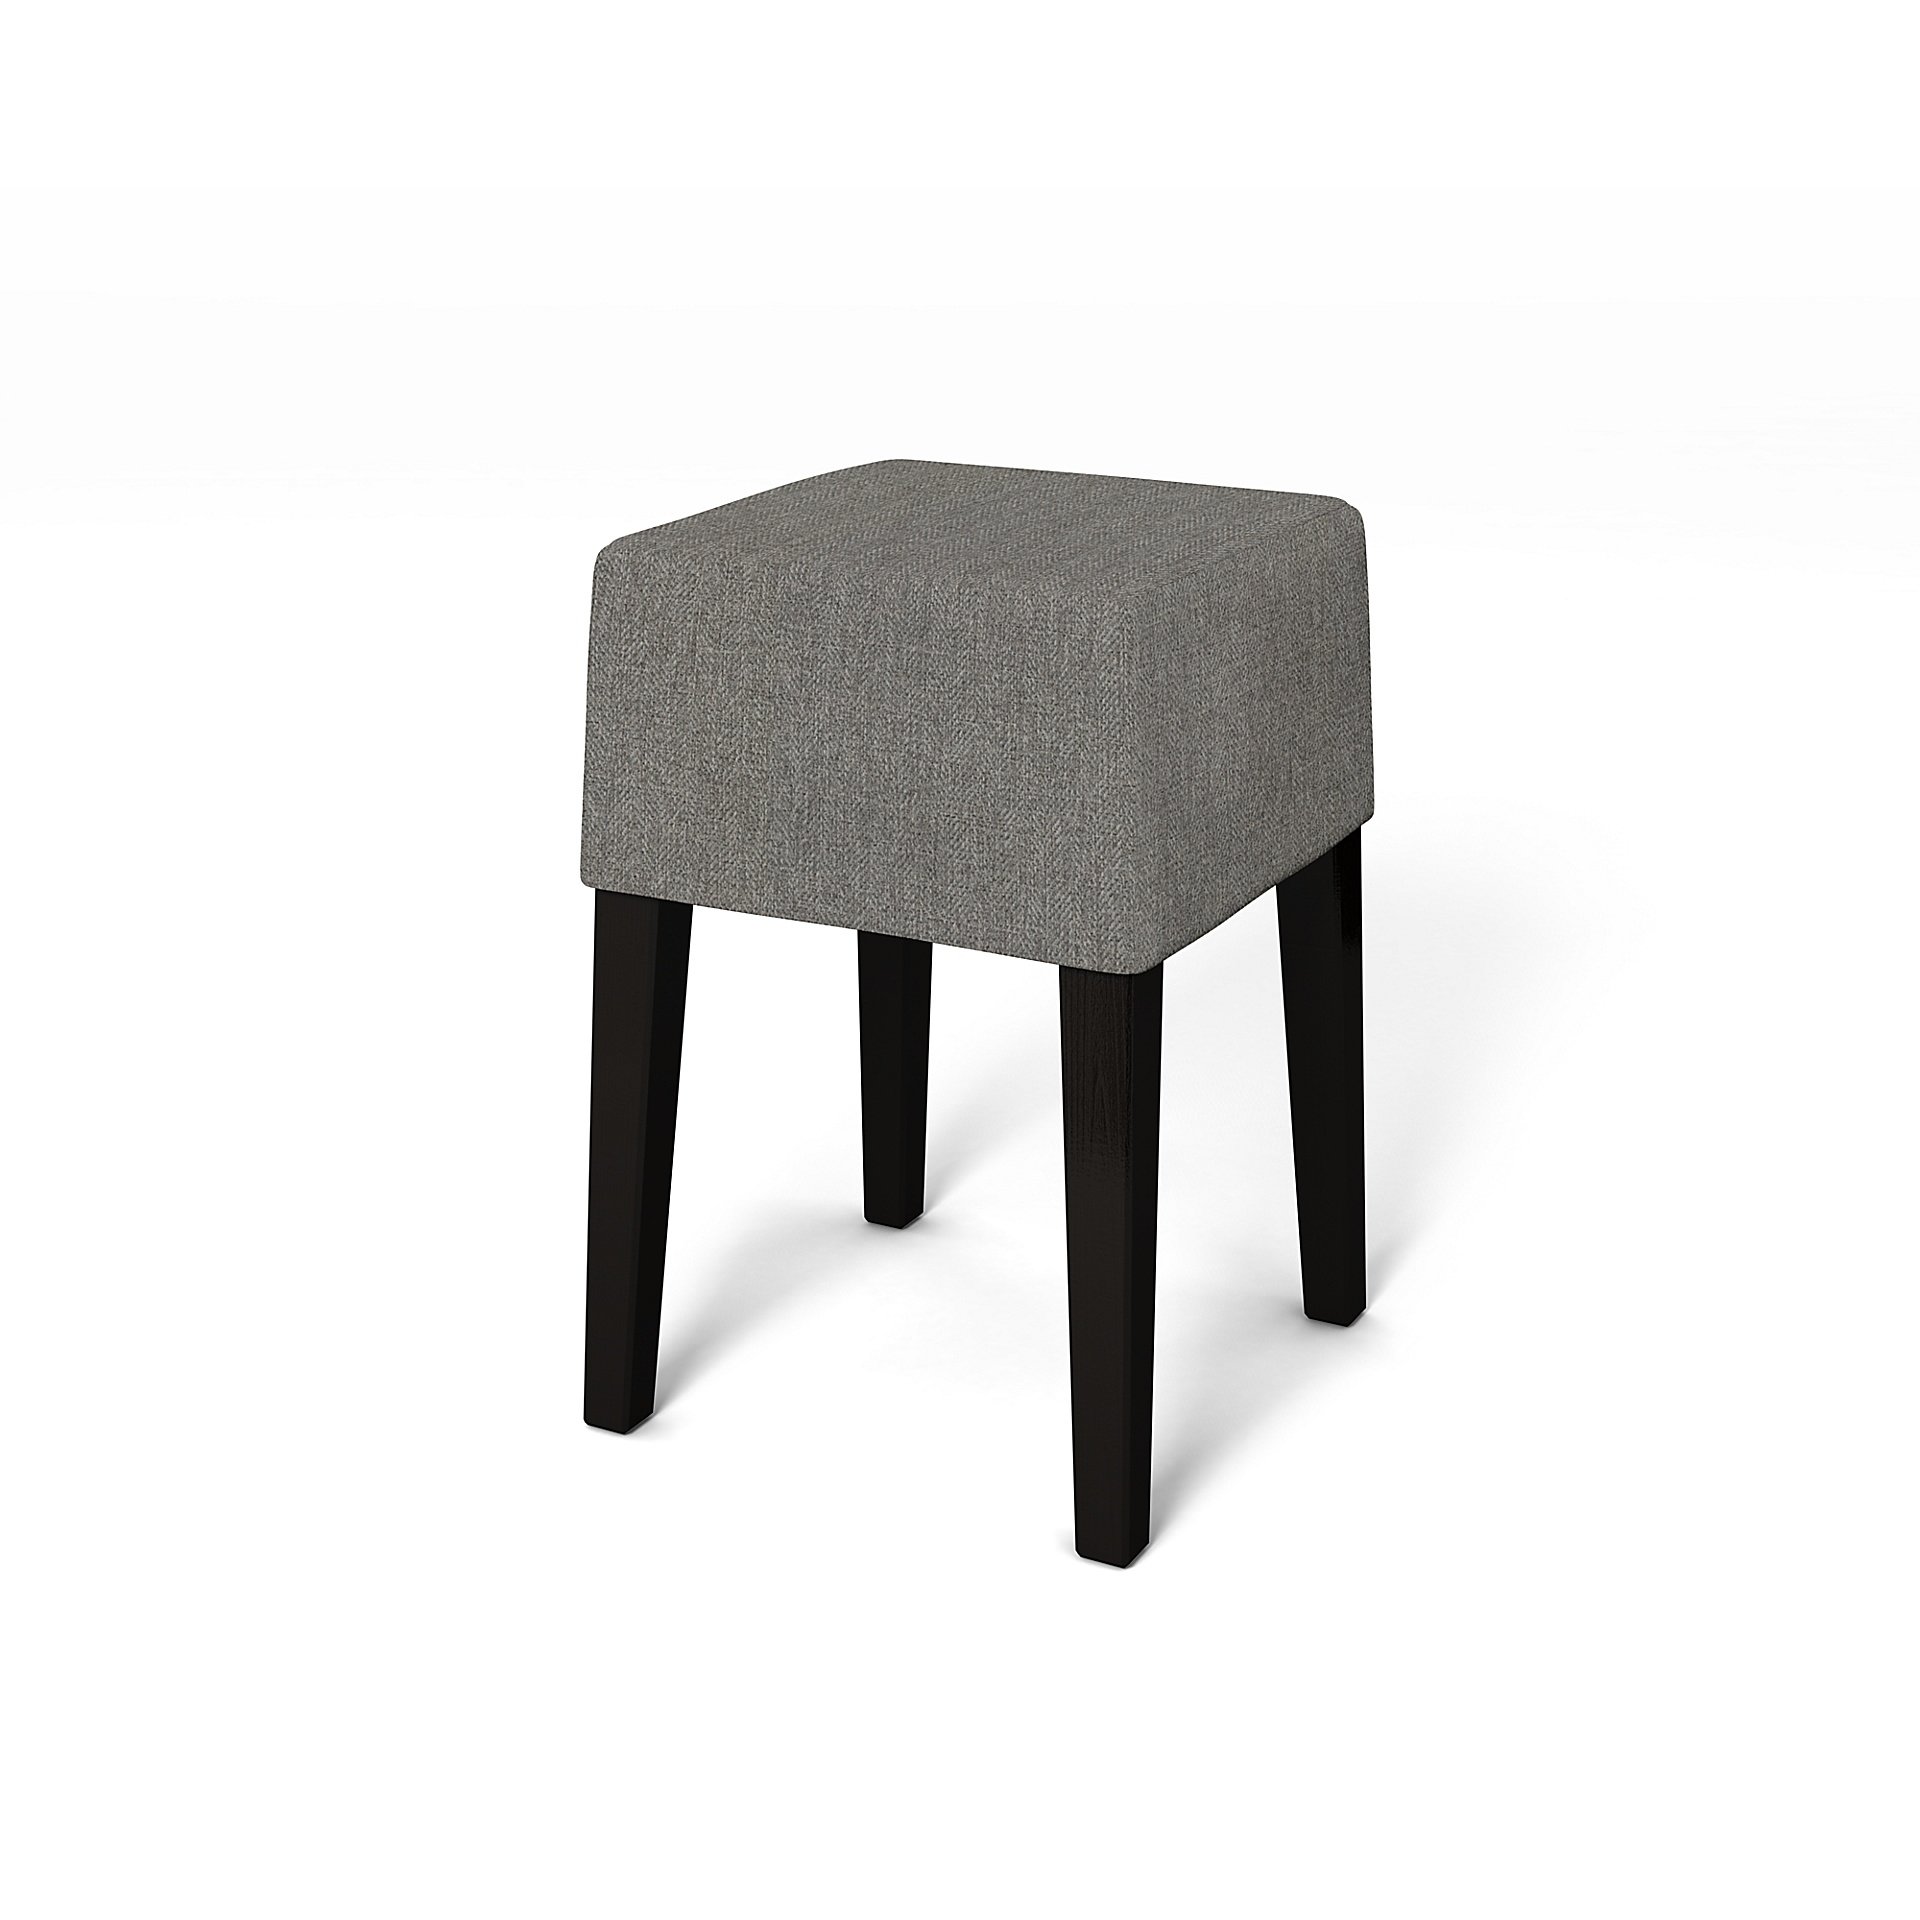 IKEA - Nils Stool Cover, Taupe, Boucle & Texture - Bemz